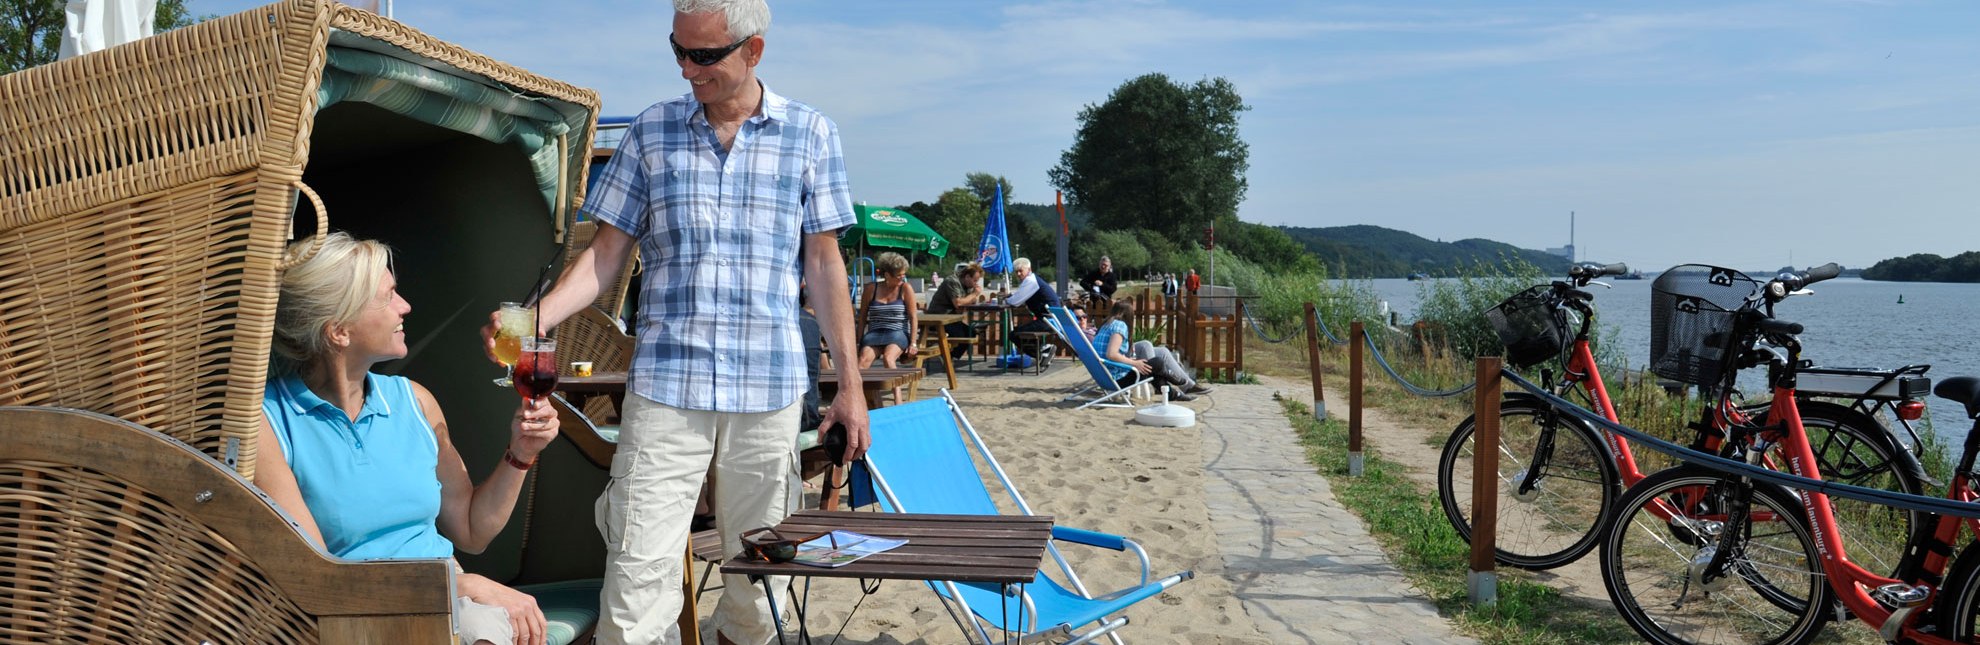 Beachclub in Geesthacht an der Elbe, © photocompany